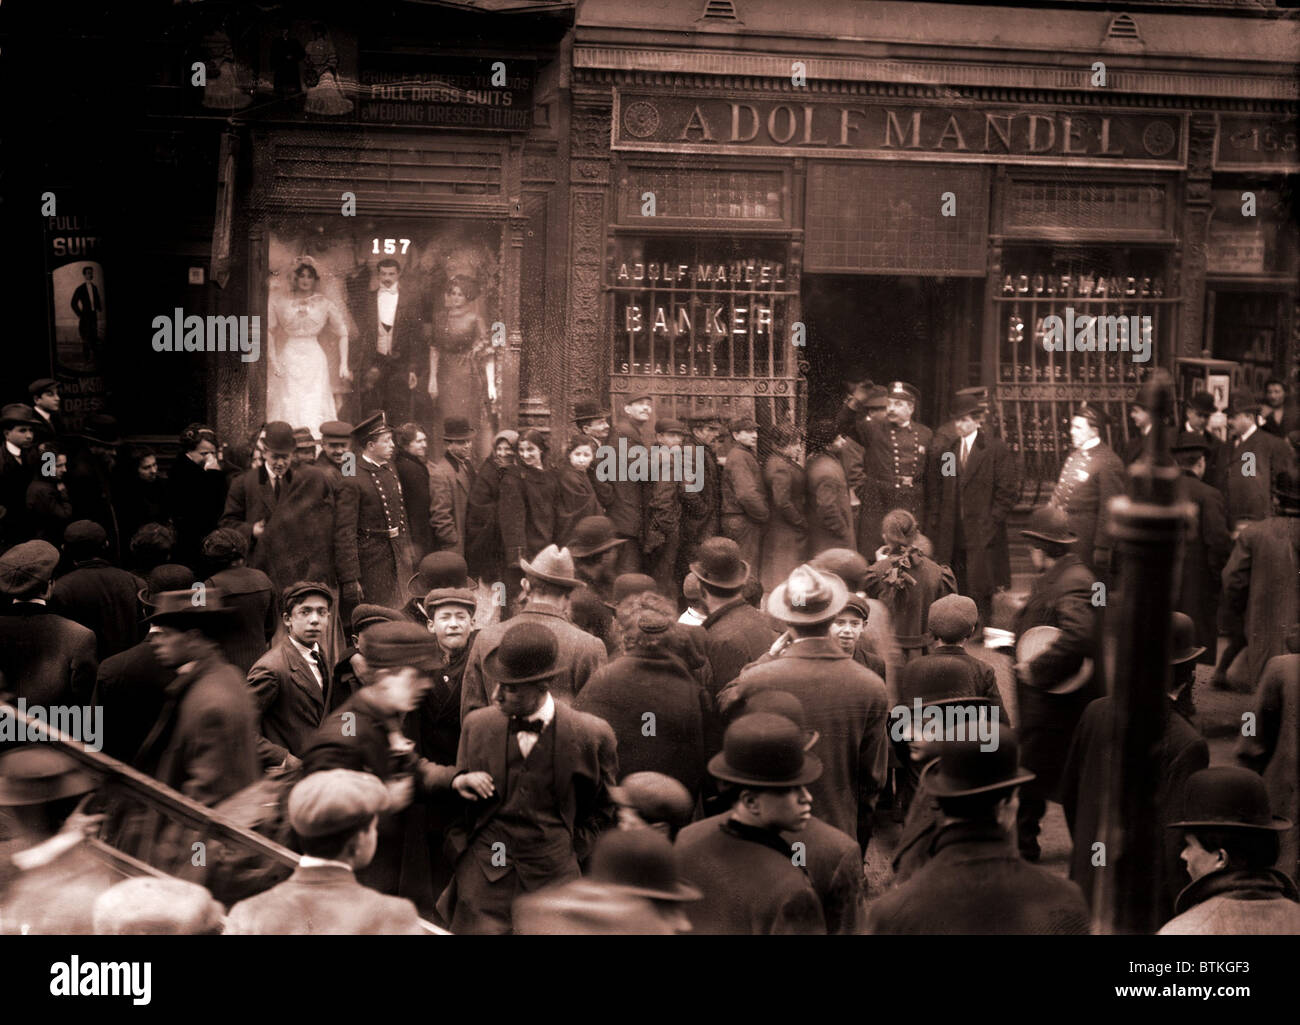 Police keep order during a run on the Adolf Mandel Bank on New York City's Lower East Side. February 16, 1912. Stock Photo